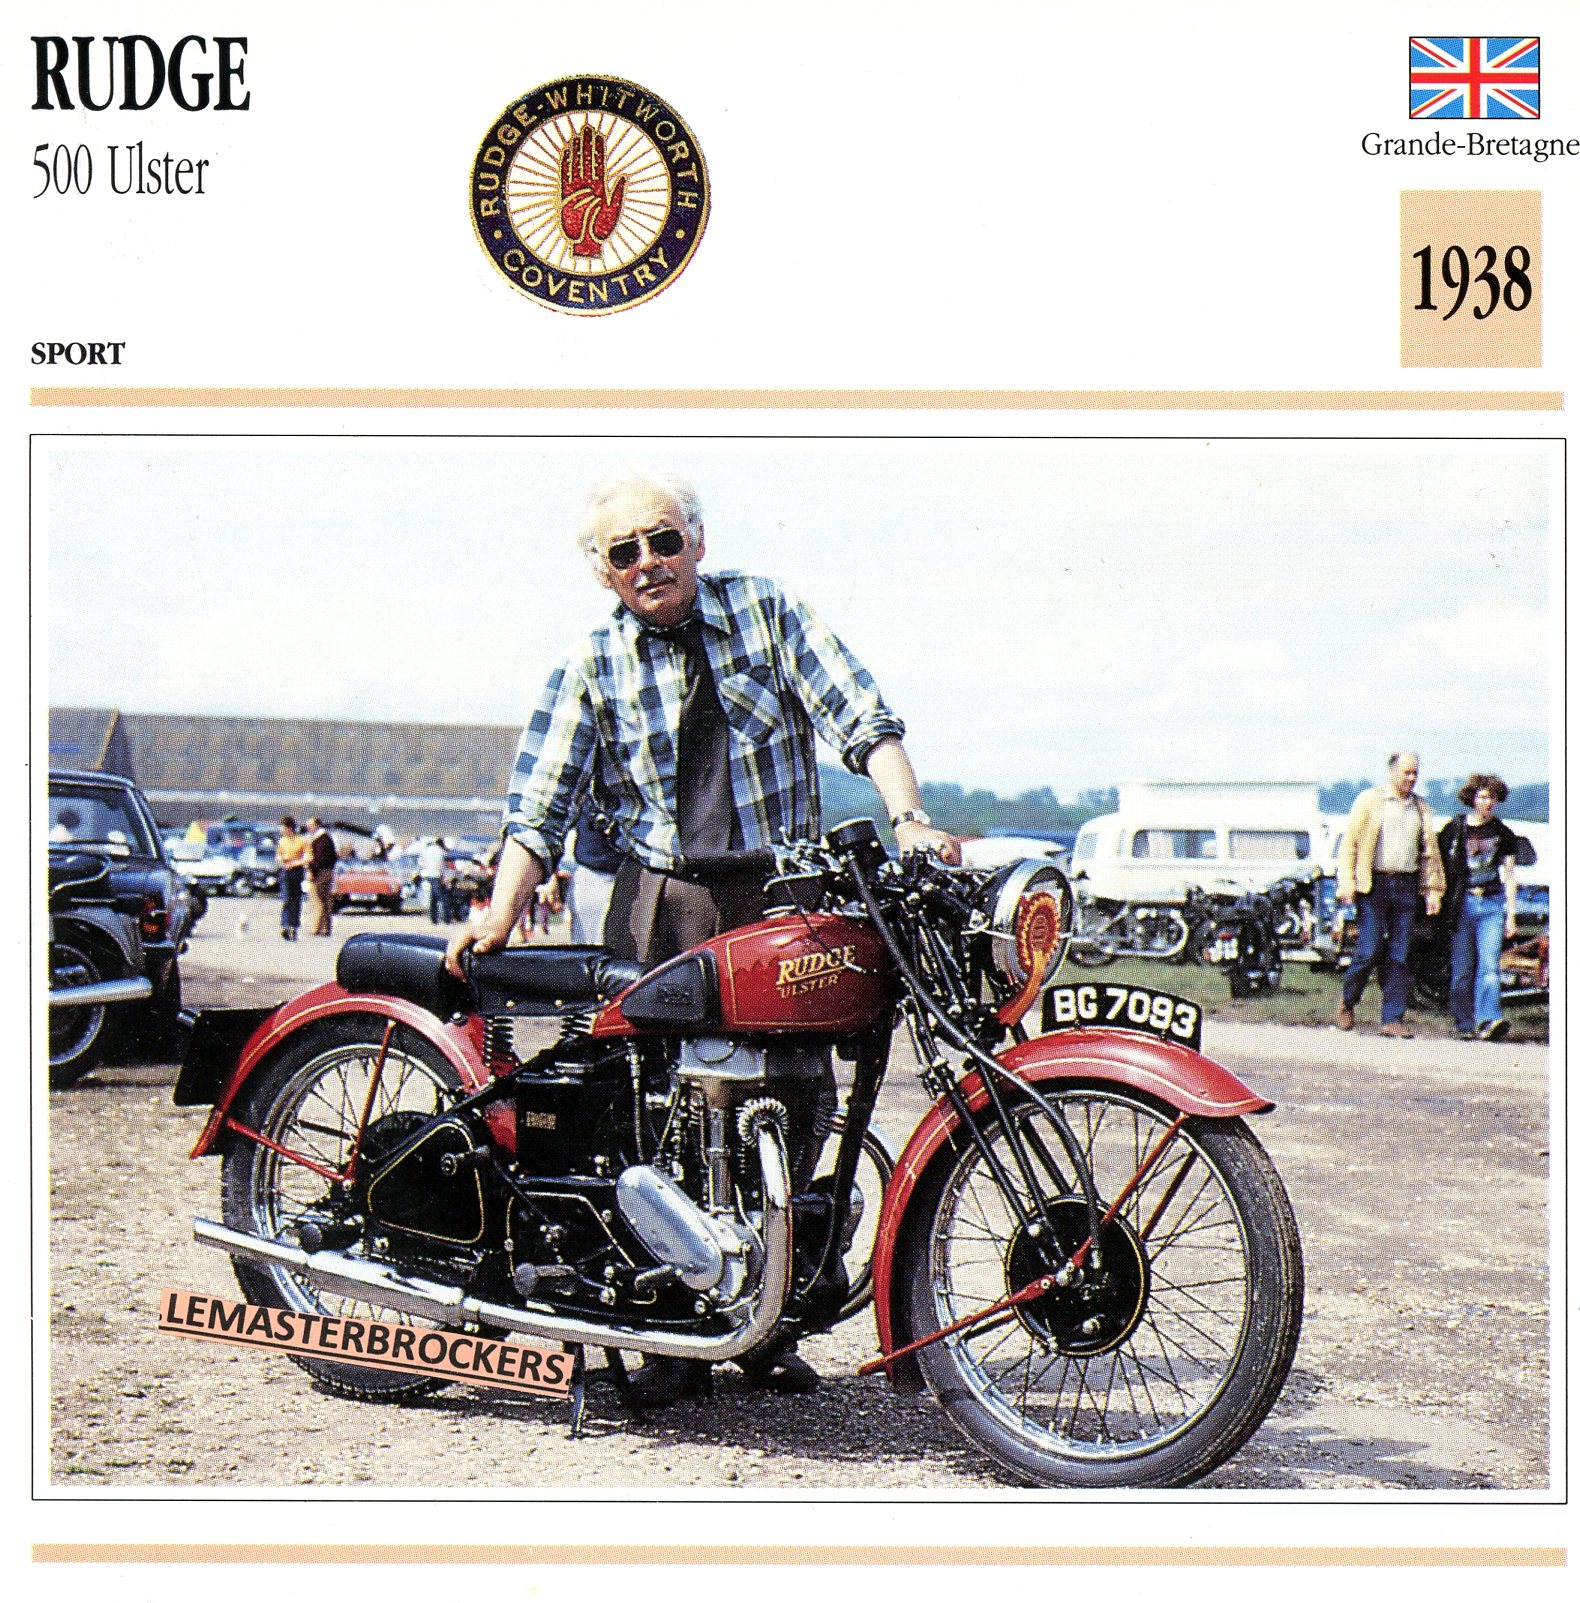 RUDGE-500-ULSTER-1938-FICHE-MOTO-LEMASTERBROCKERS-CARD-MOTORCYCLE